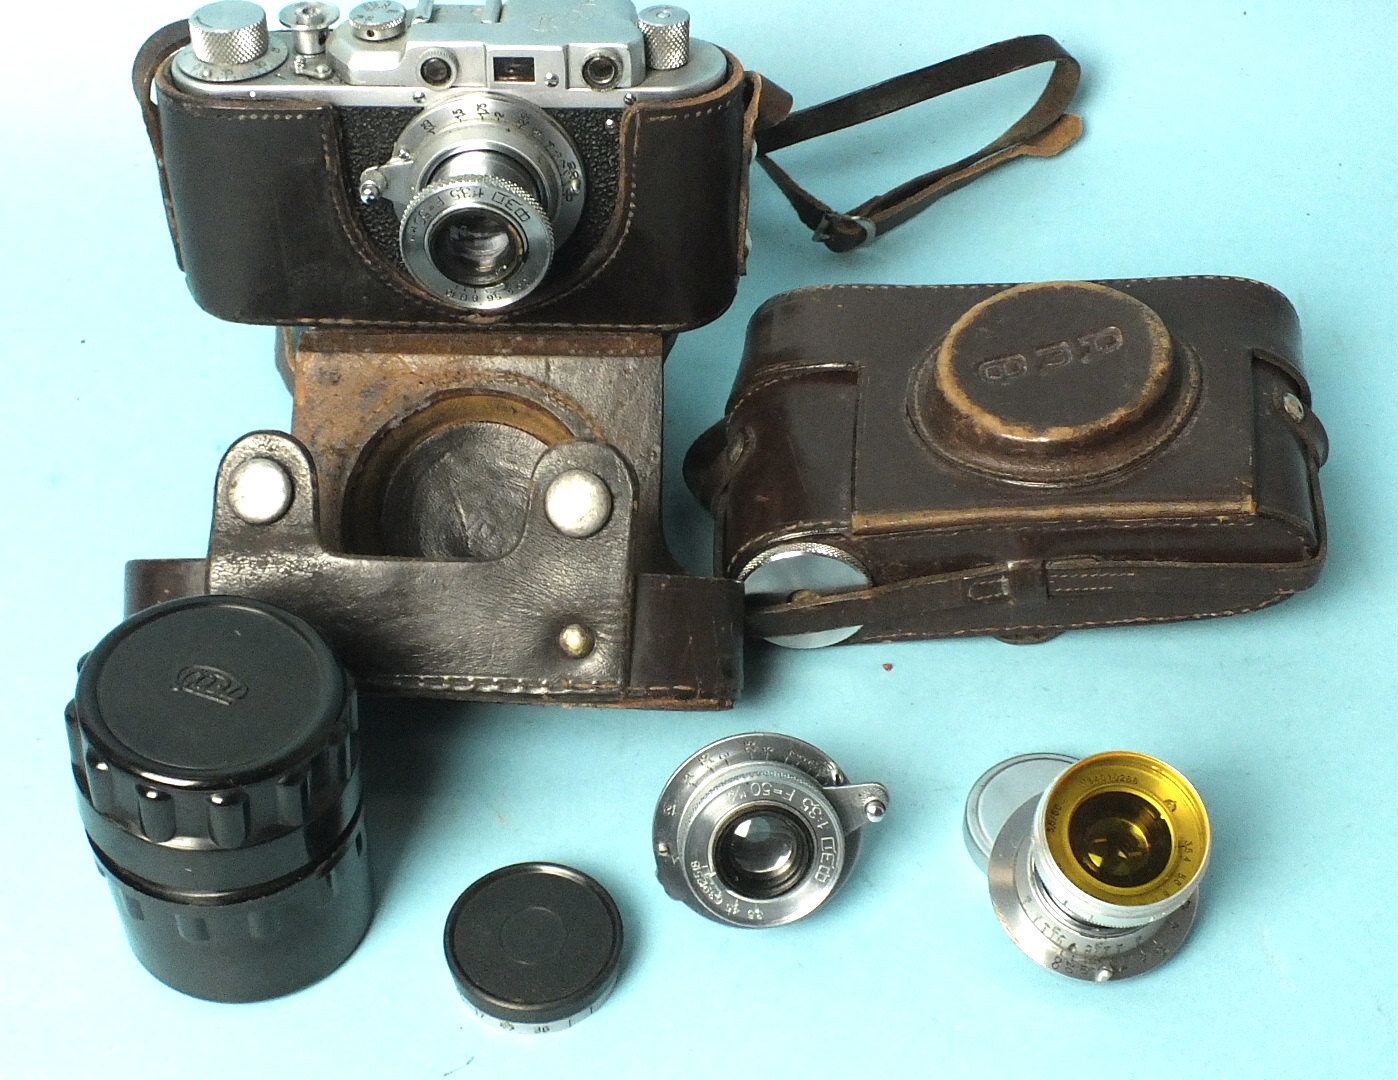 A Russian Fed copy of a Leica II Rangefinder camera, numbered 669086, in leather case, a Fed leather